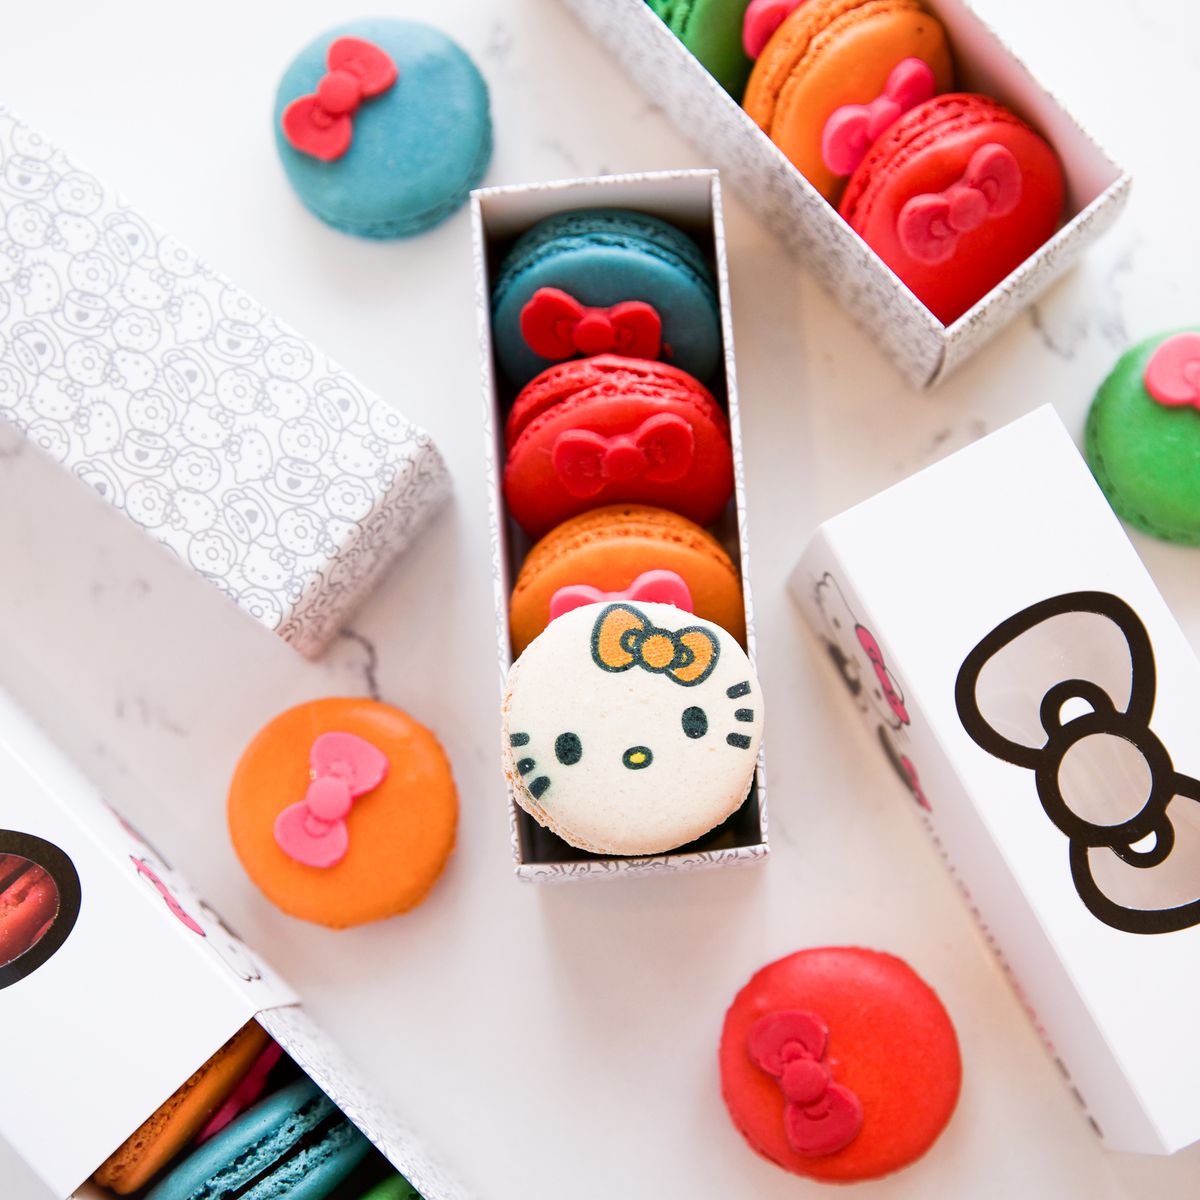 A rectangular box filled with macarons with Hello Kitty faces on them.